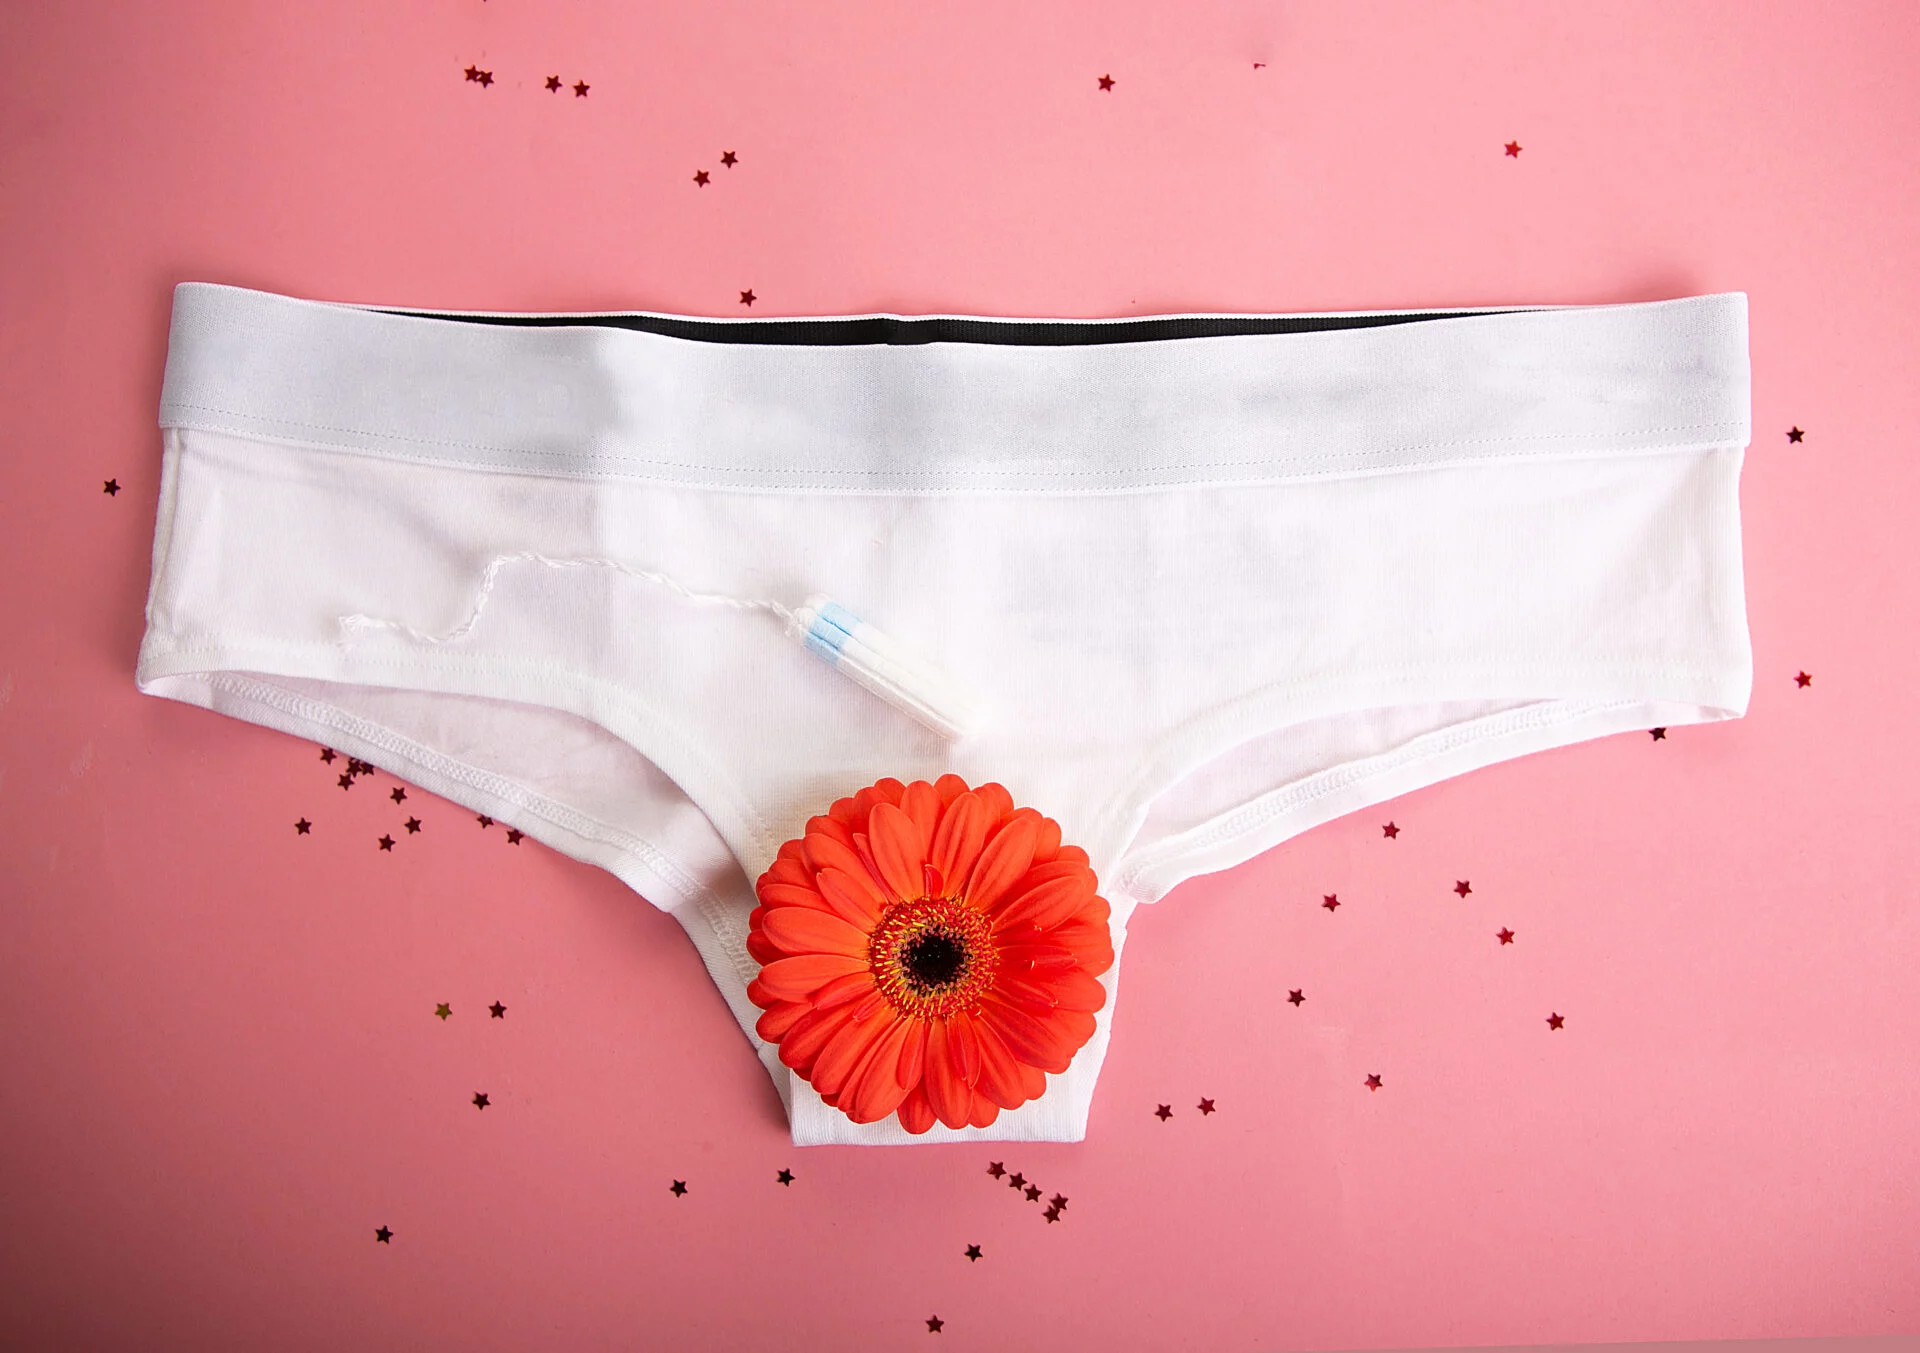 How To Get The Smell Out Of Period Underwear